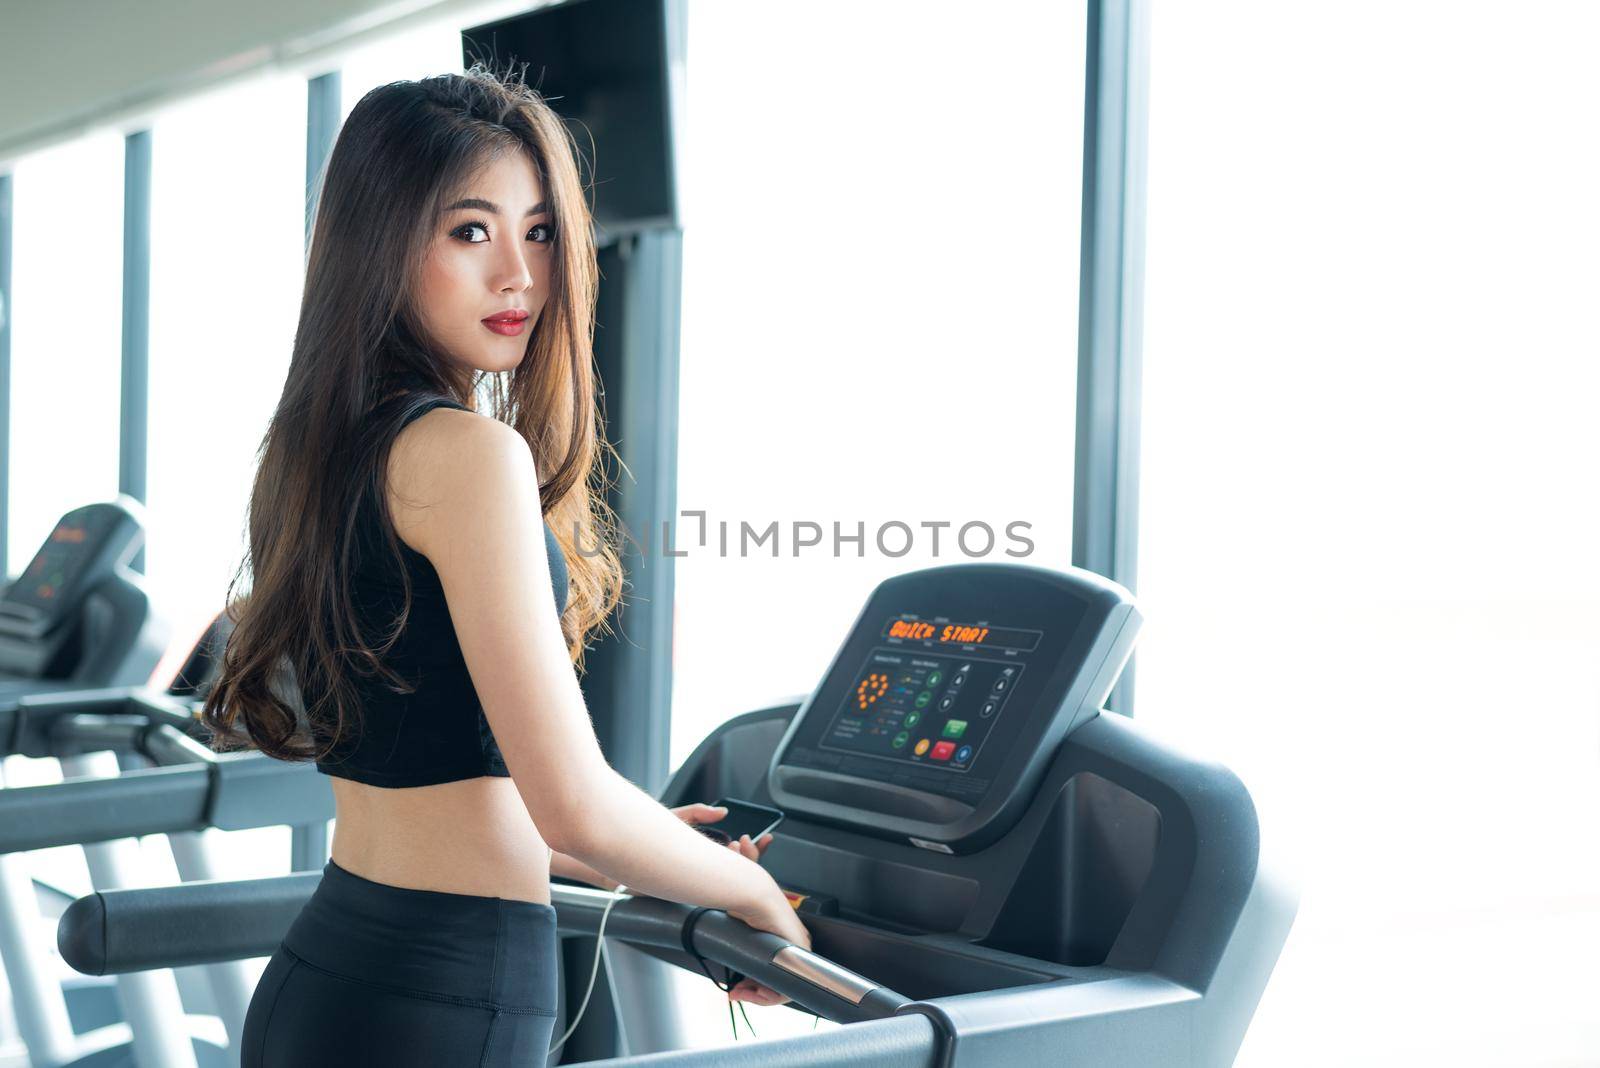 Asian sport woman walking or running on treadmill equipment in fitness workout gym. Sport and Beauty concept. Workout and Strength Training theme. Cardio and Diet theme. Woman portrait